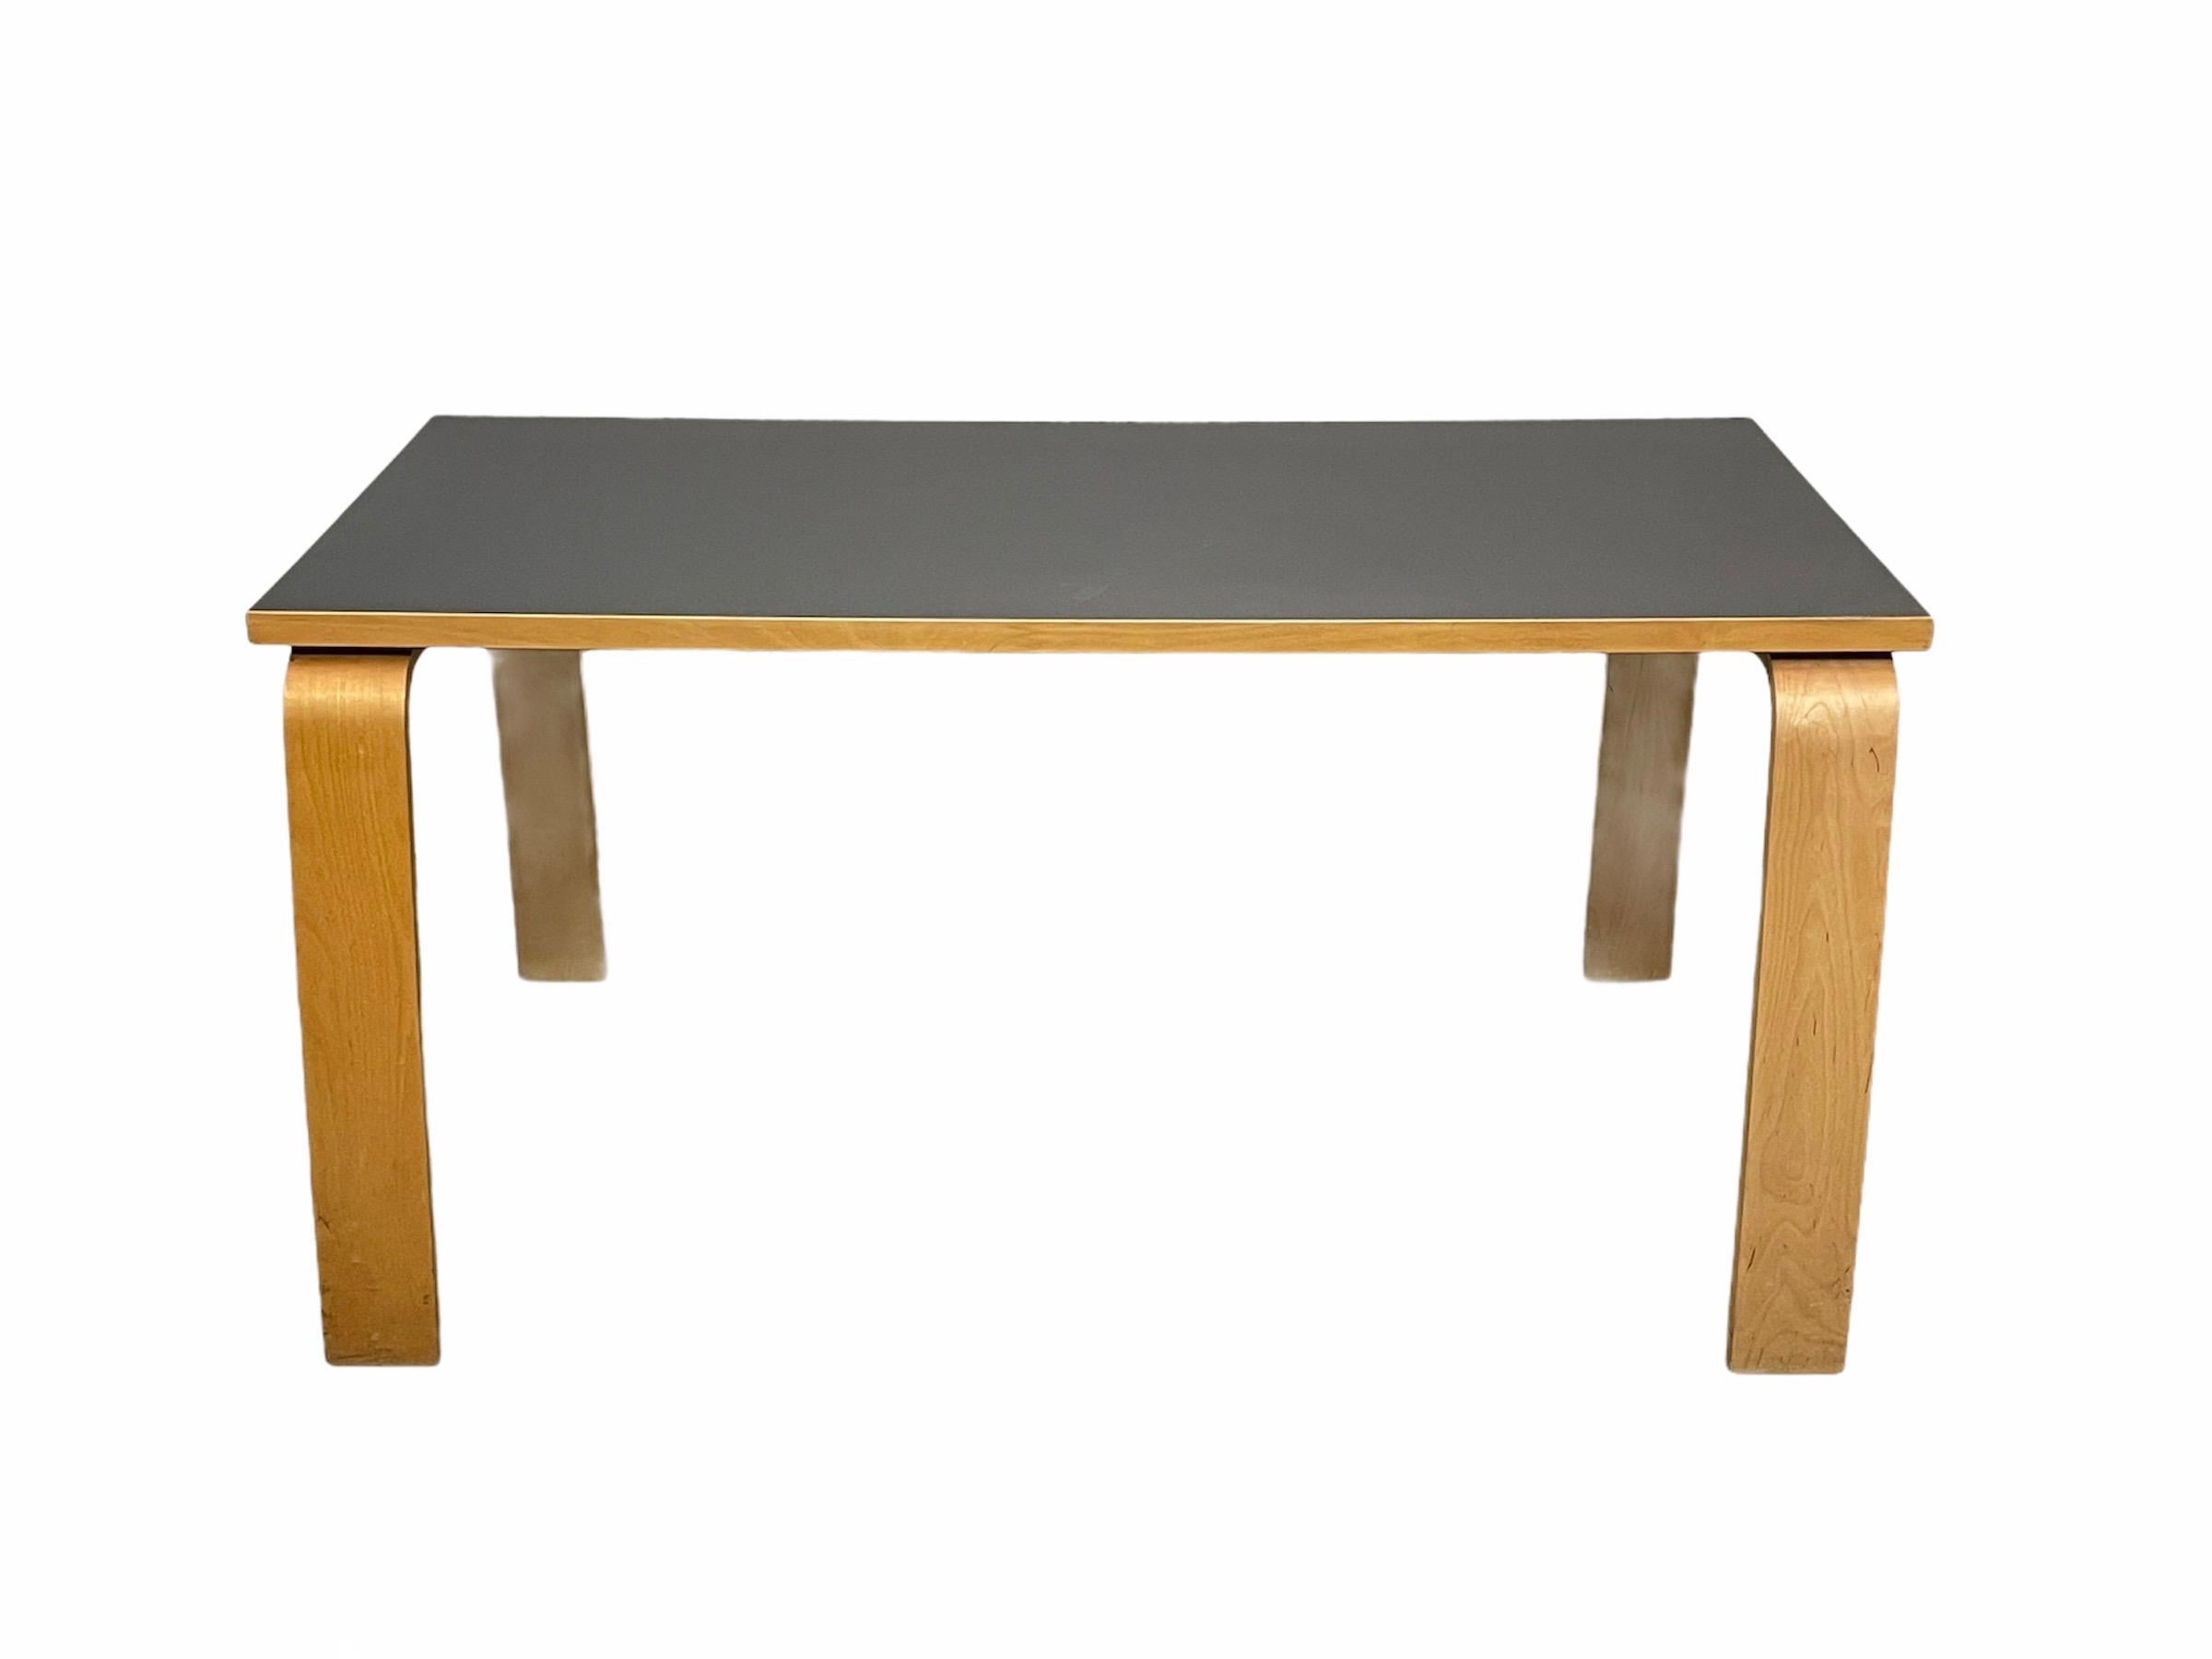 20th Century Midcentury Alvar Aalto Style Grey Formica and Wood Italian Dining Table, 1980s